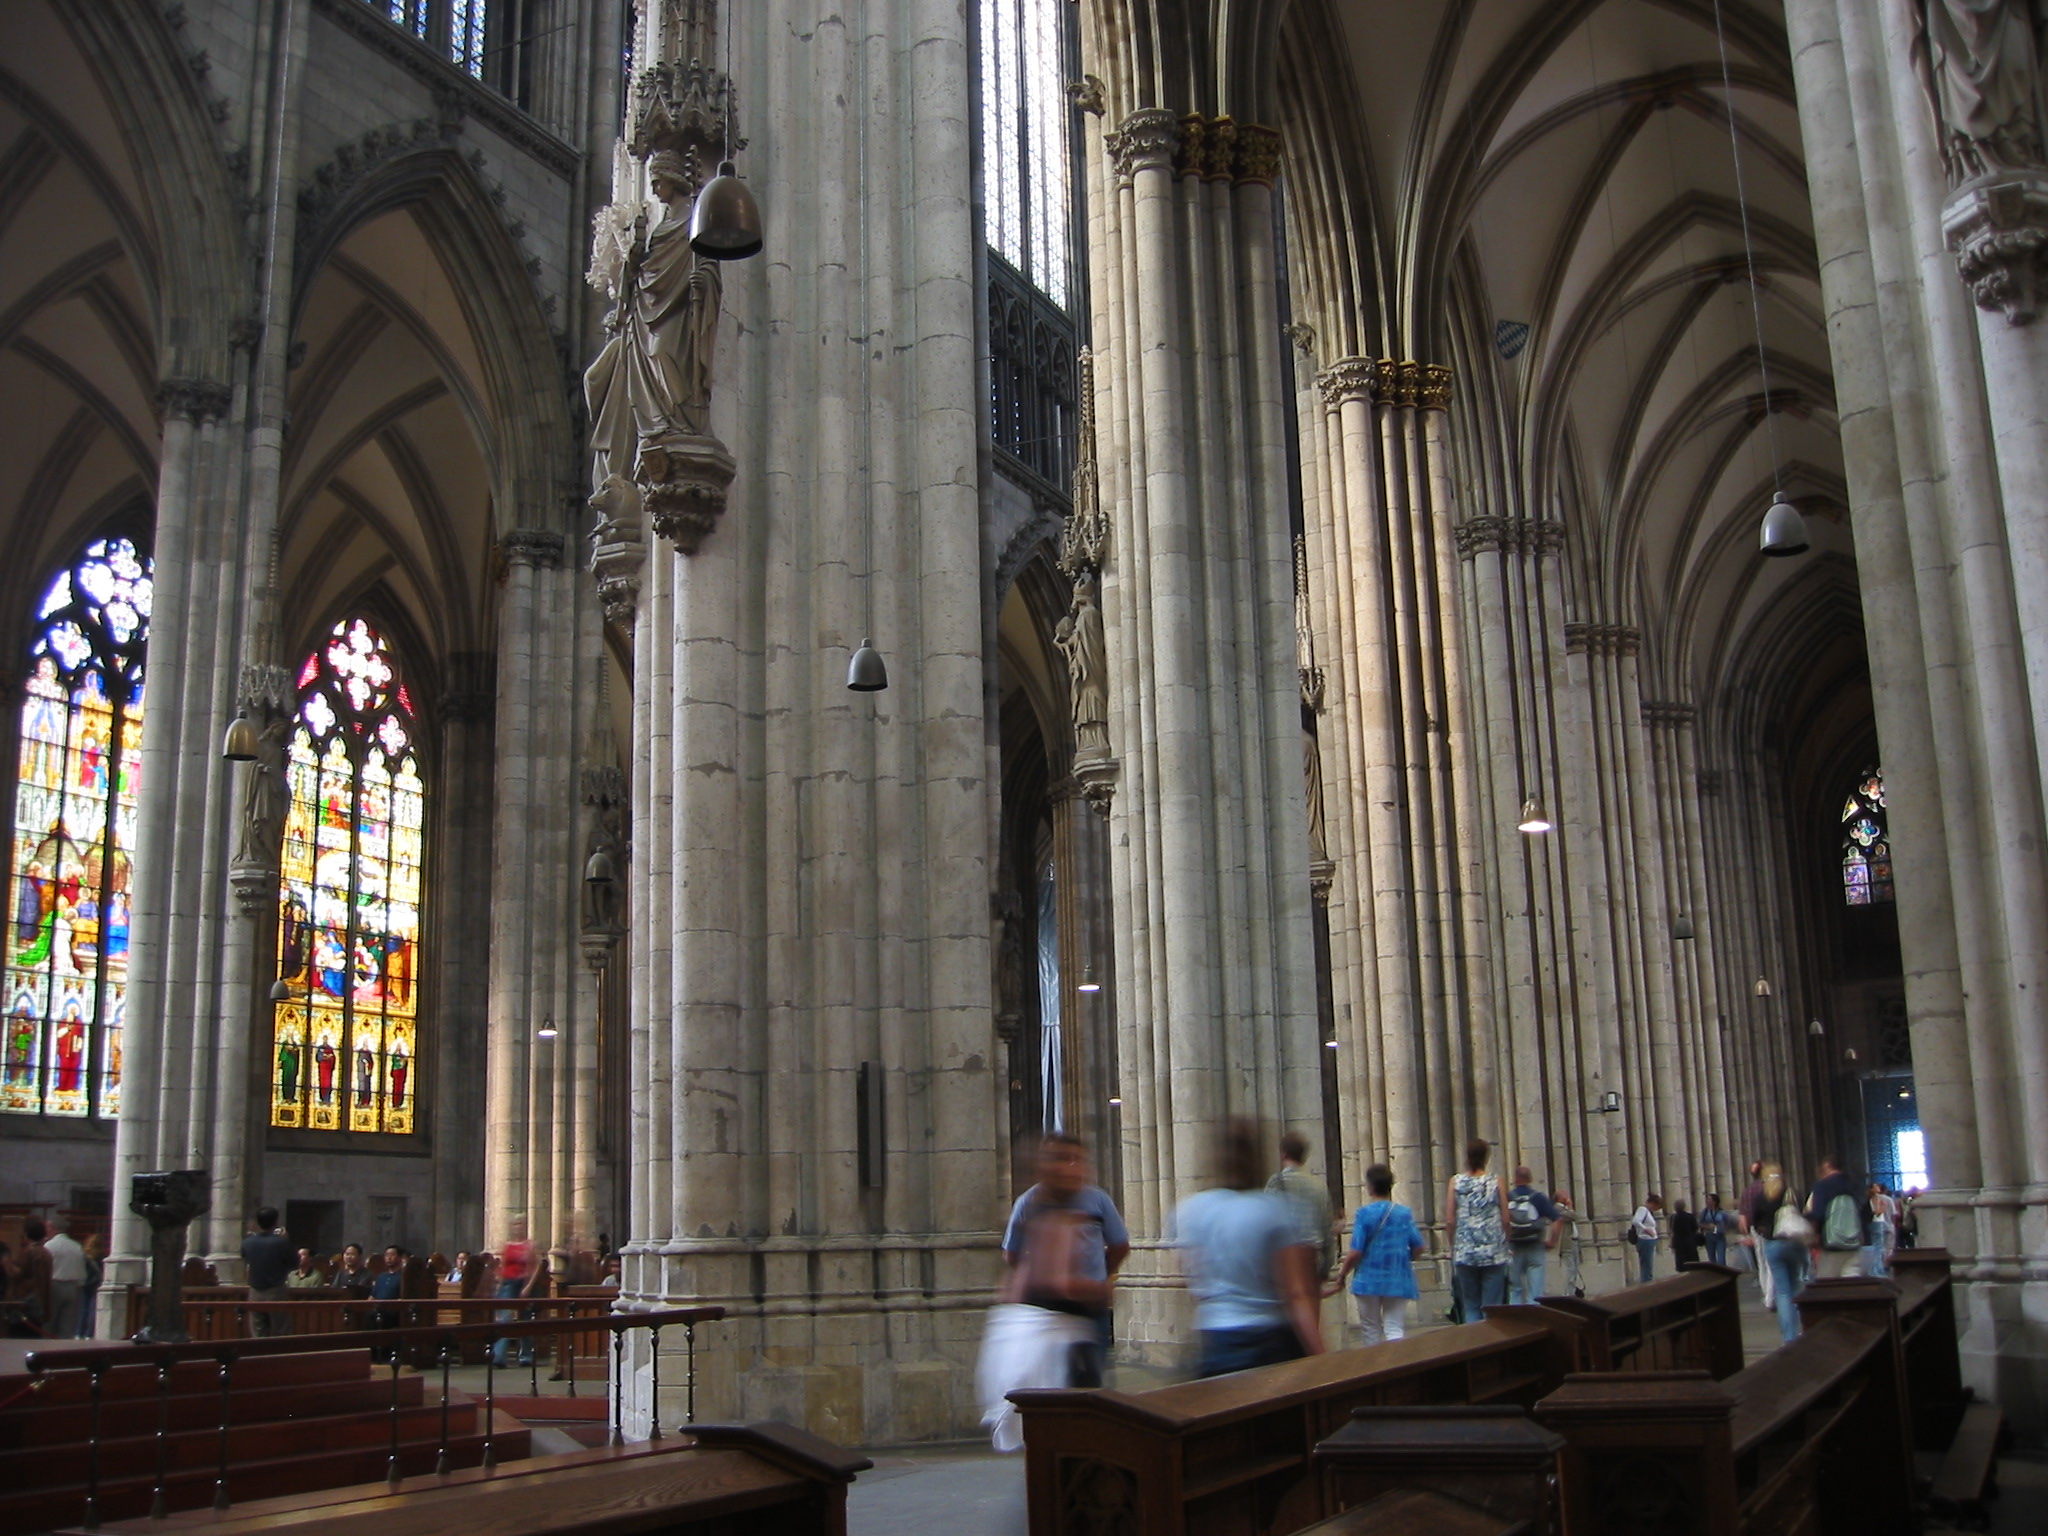 Inside the Cathedral of Cologne